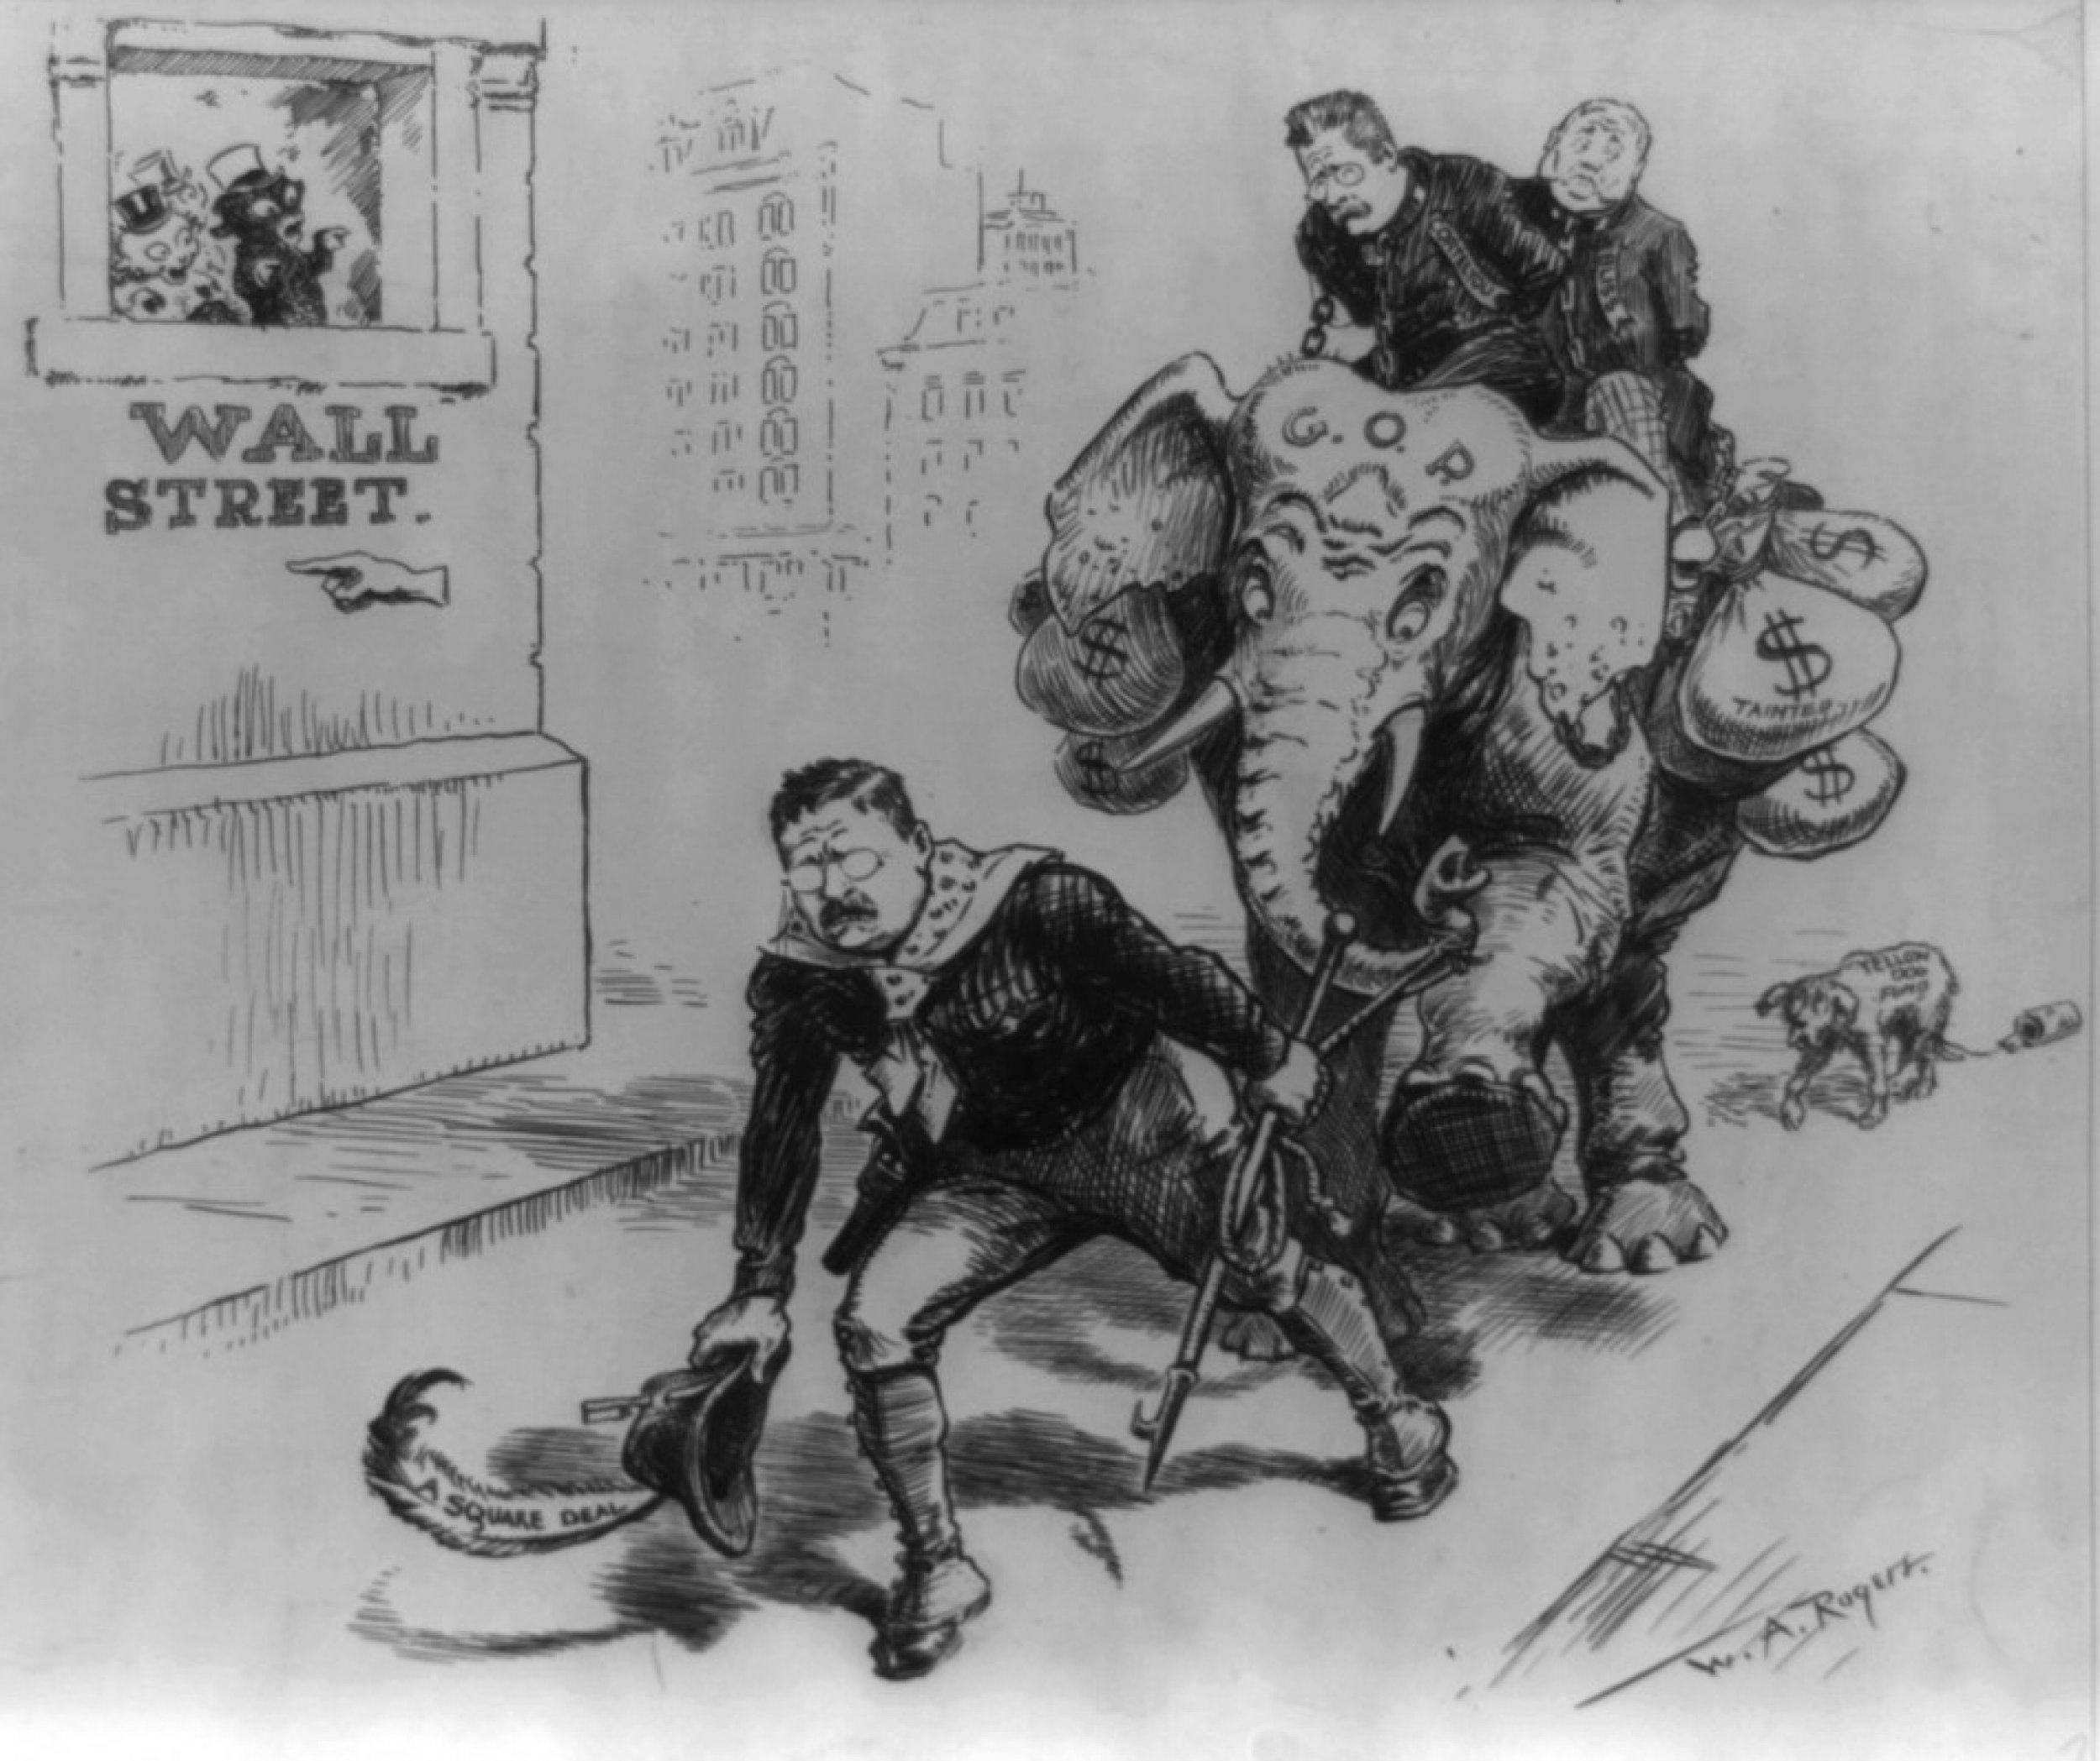 Roosevelt039s reputation preceded him and led many to surmise he was the right man to take on an out-of-control Wall Street. This 1905 cartoon by W.A. Rogers in the New York Herald makes the point.